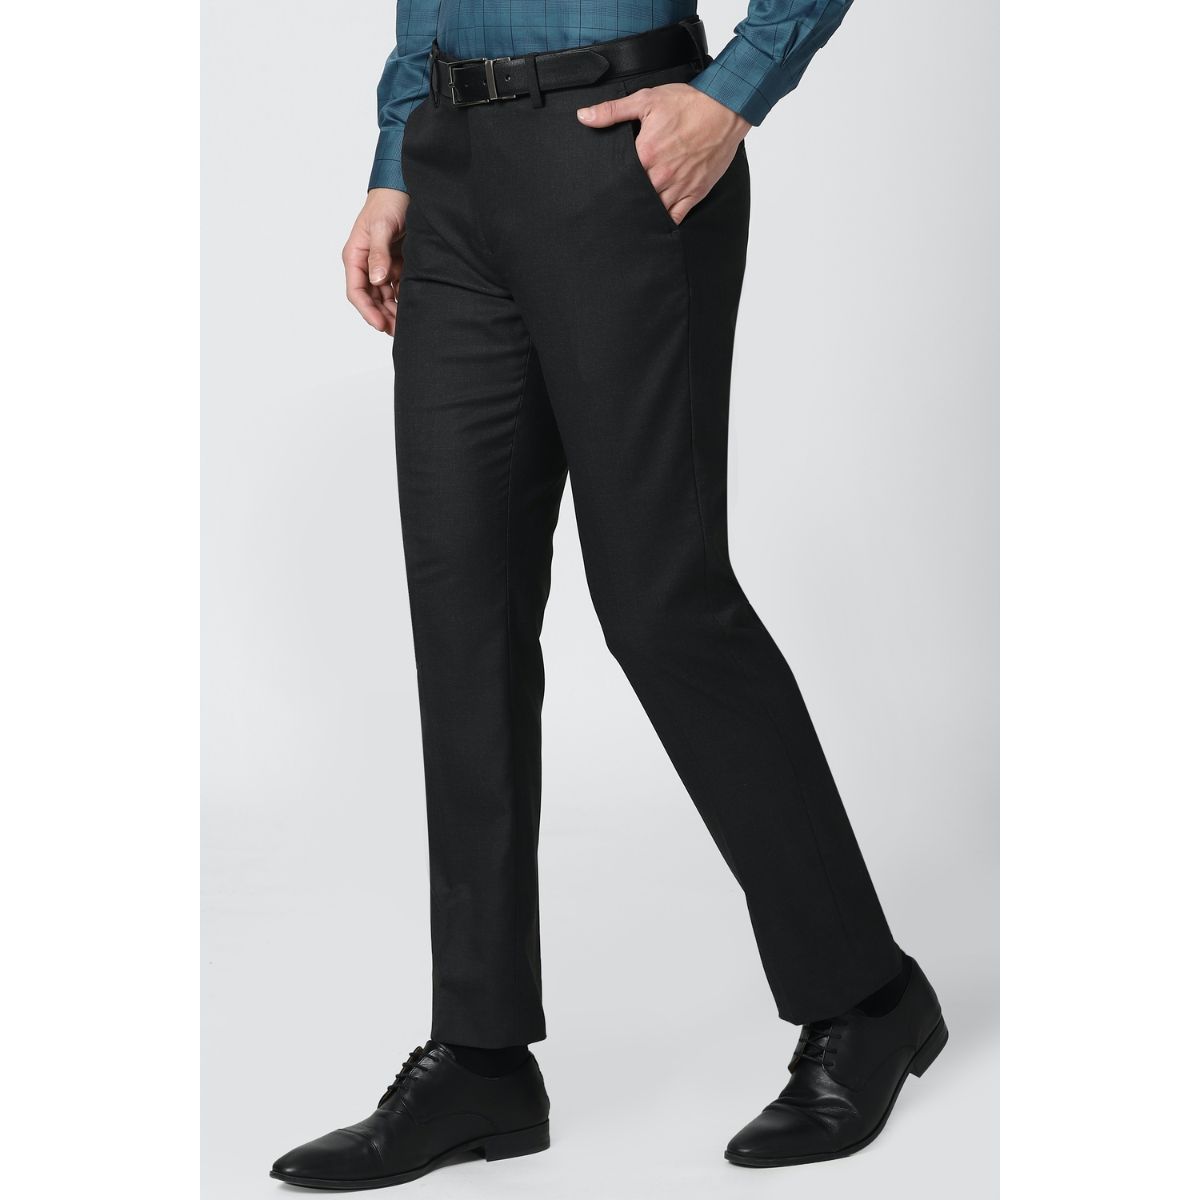 Buy Peter England Men Black Checked Slim Fit Formal Trousers - Trousers for  Men 19271978 | Myntra